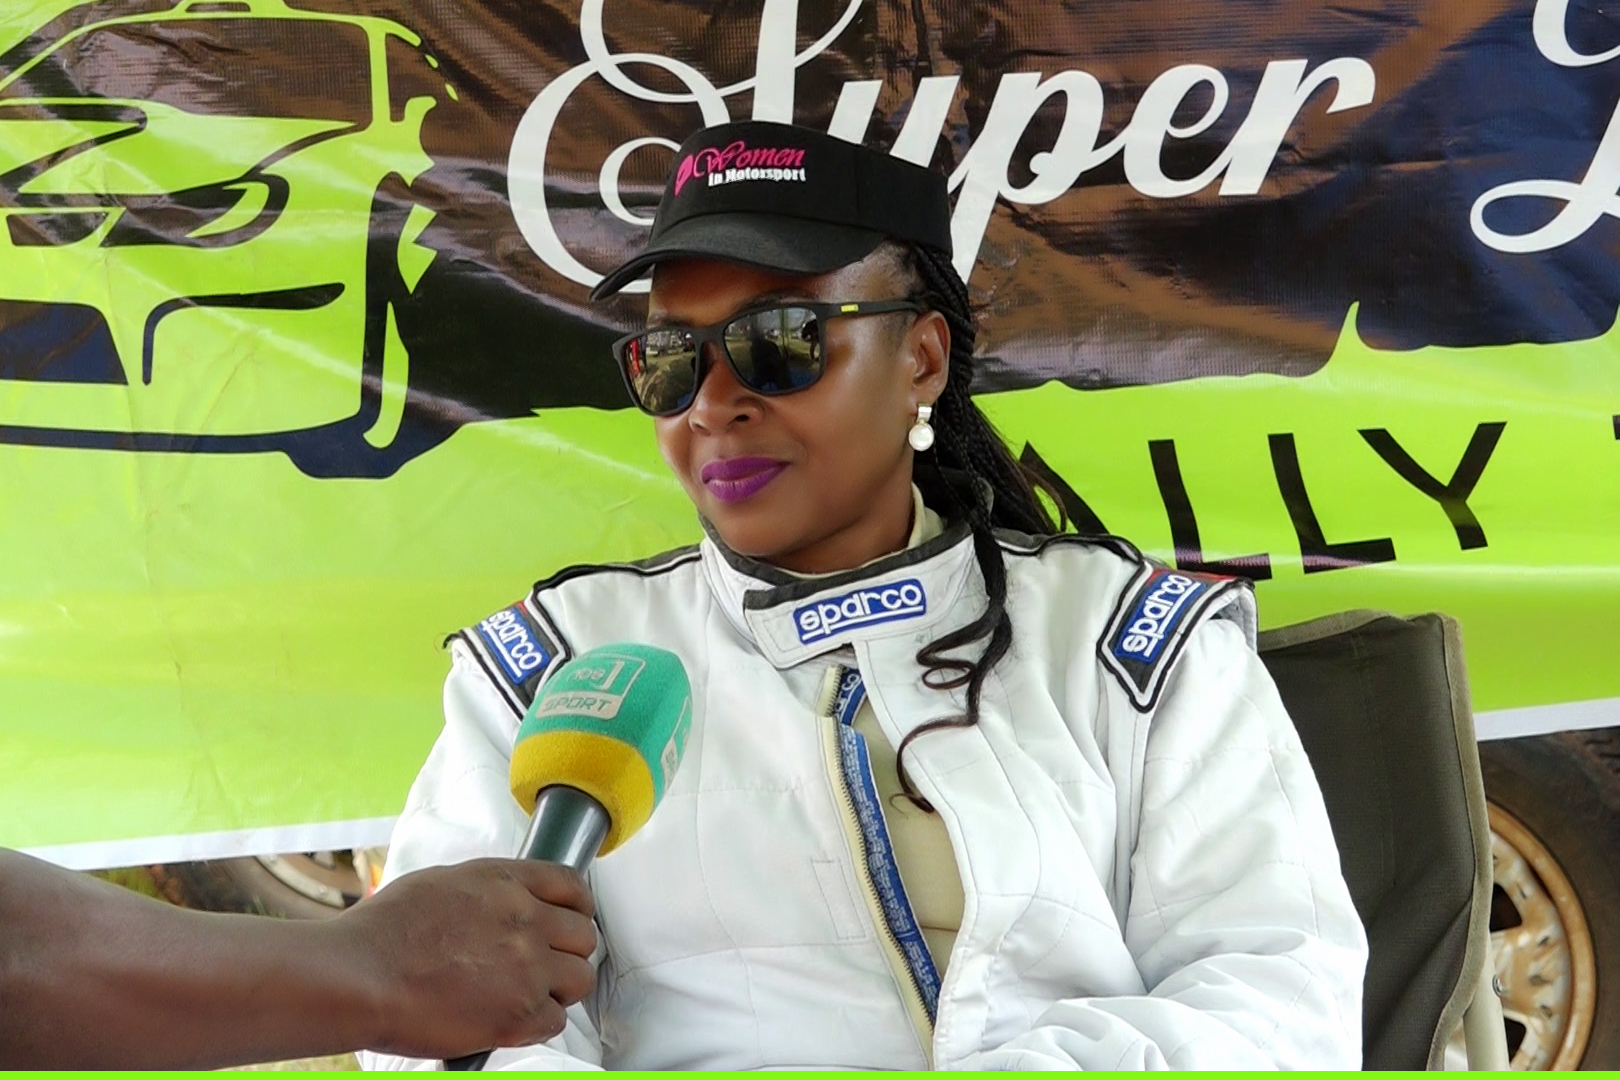 Dust, dreams, and defying the finish line: Susan Muwonge's rally to glory